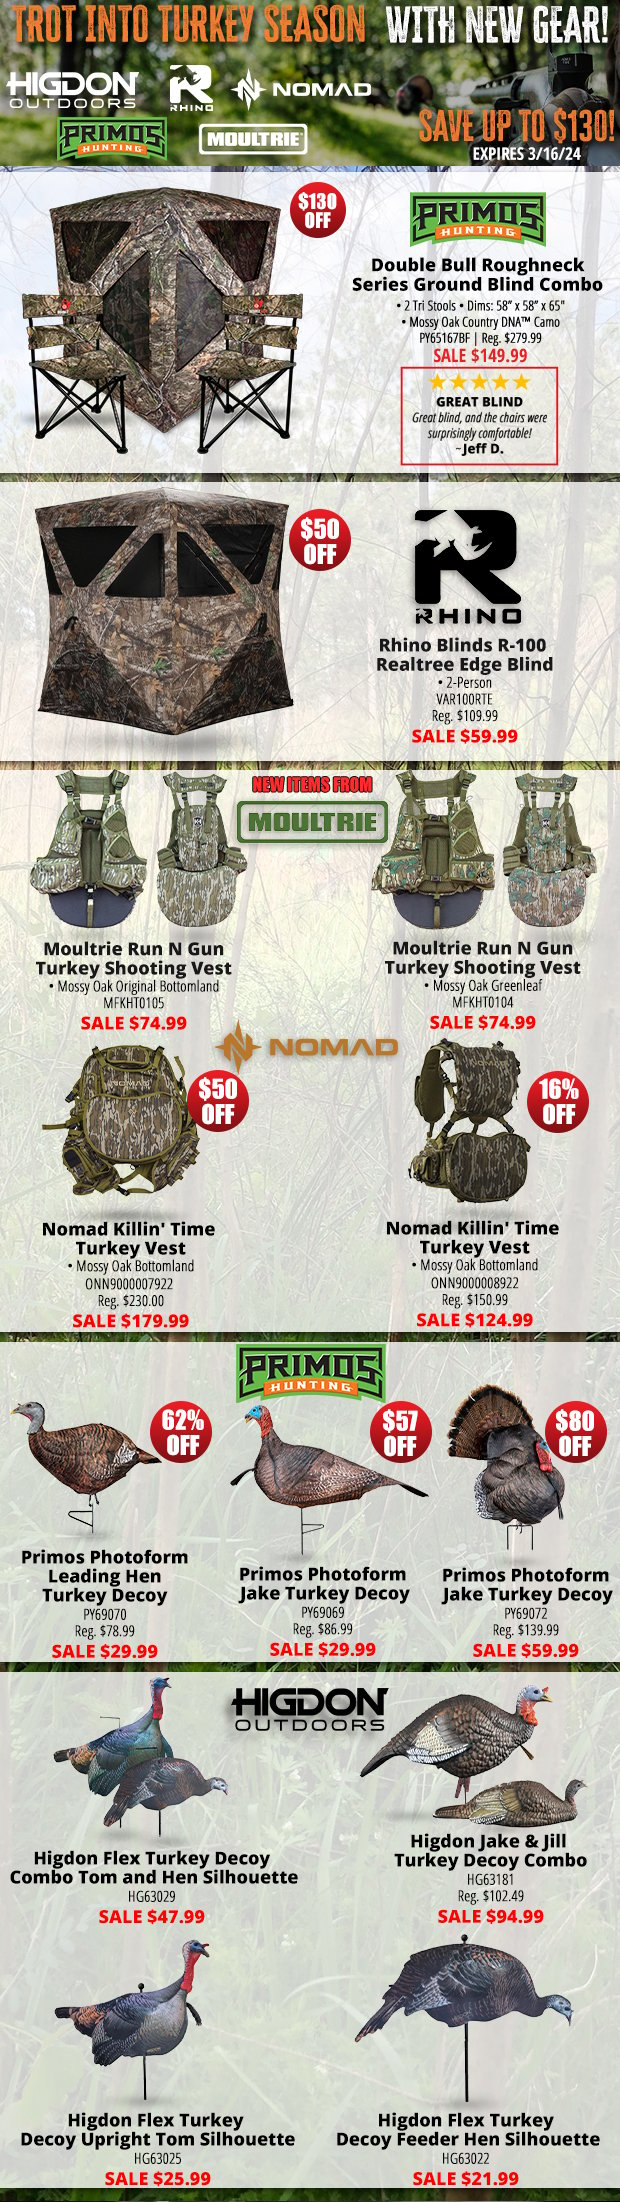 Trot Into Turkey Season With New Gear! Save Up To $130!